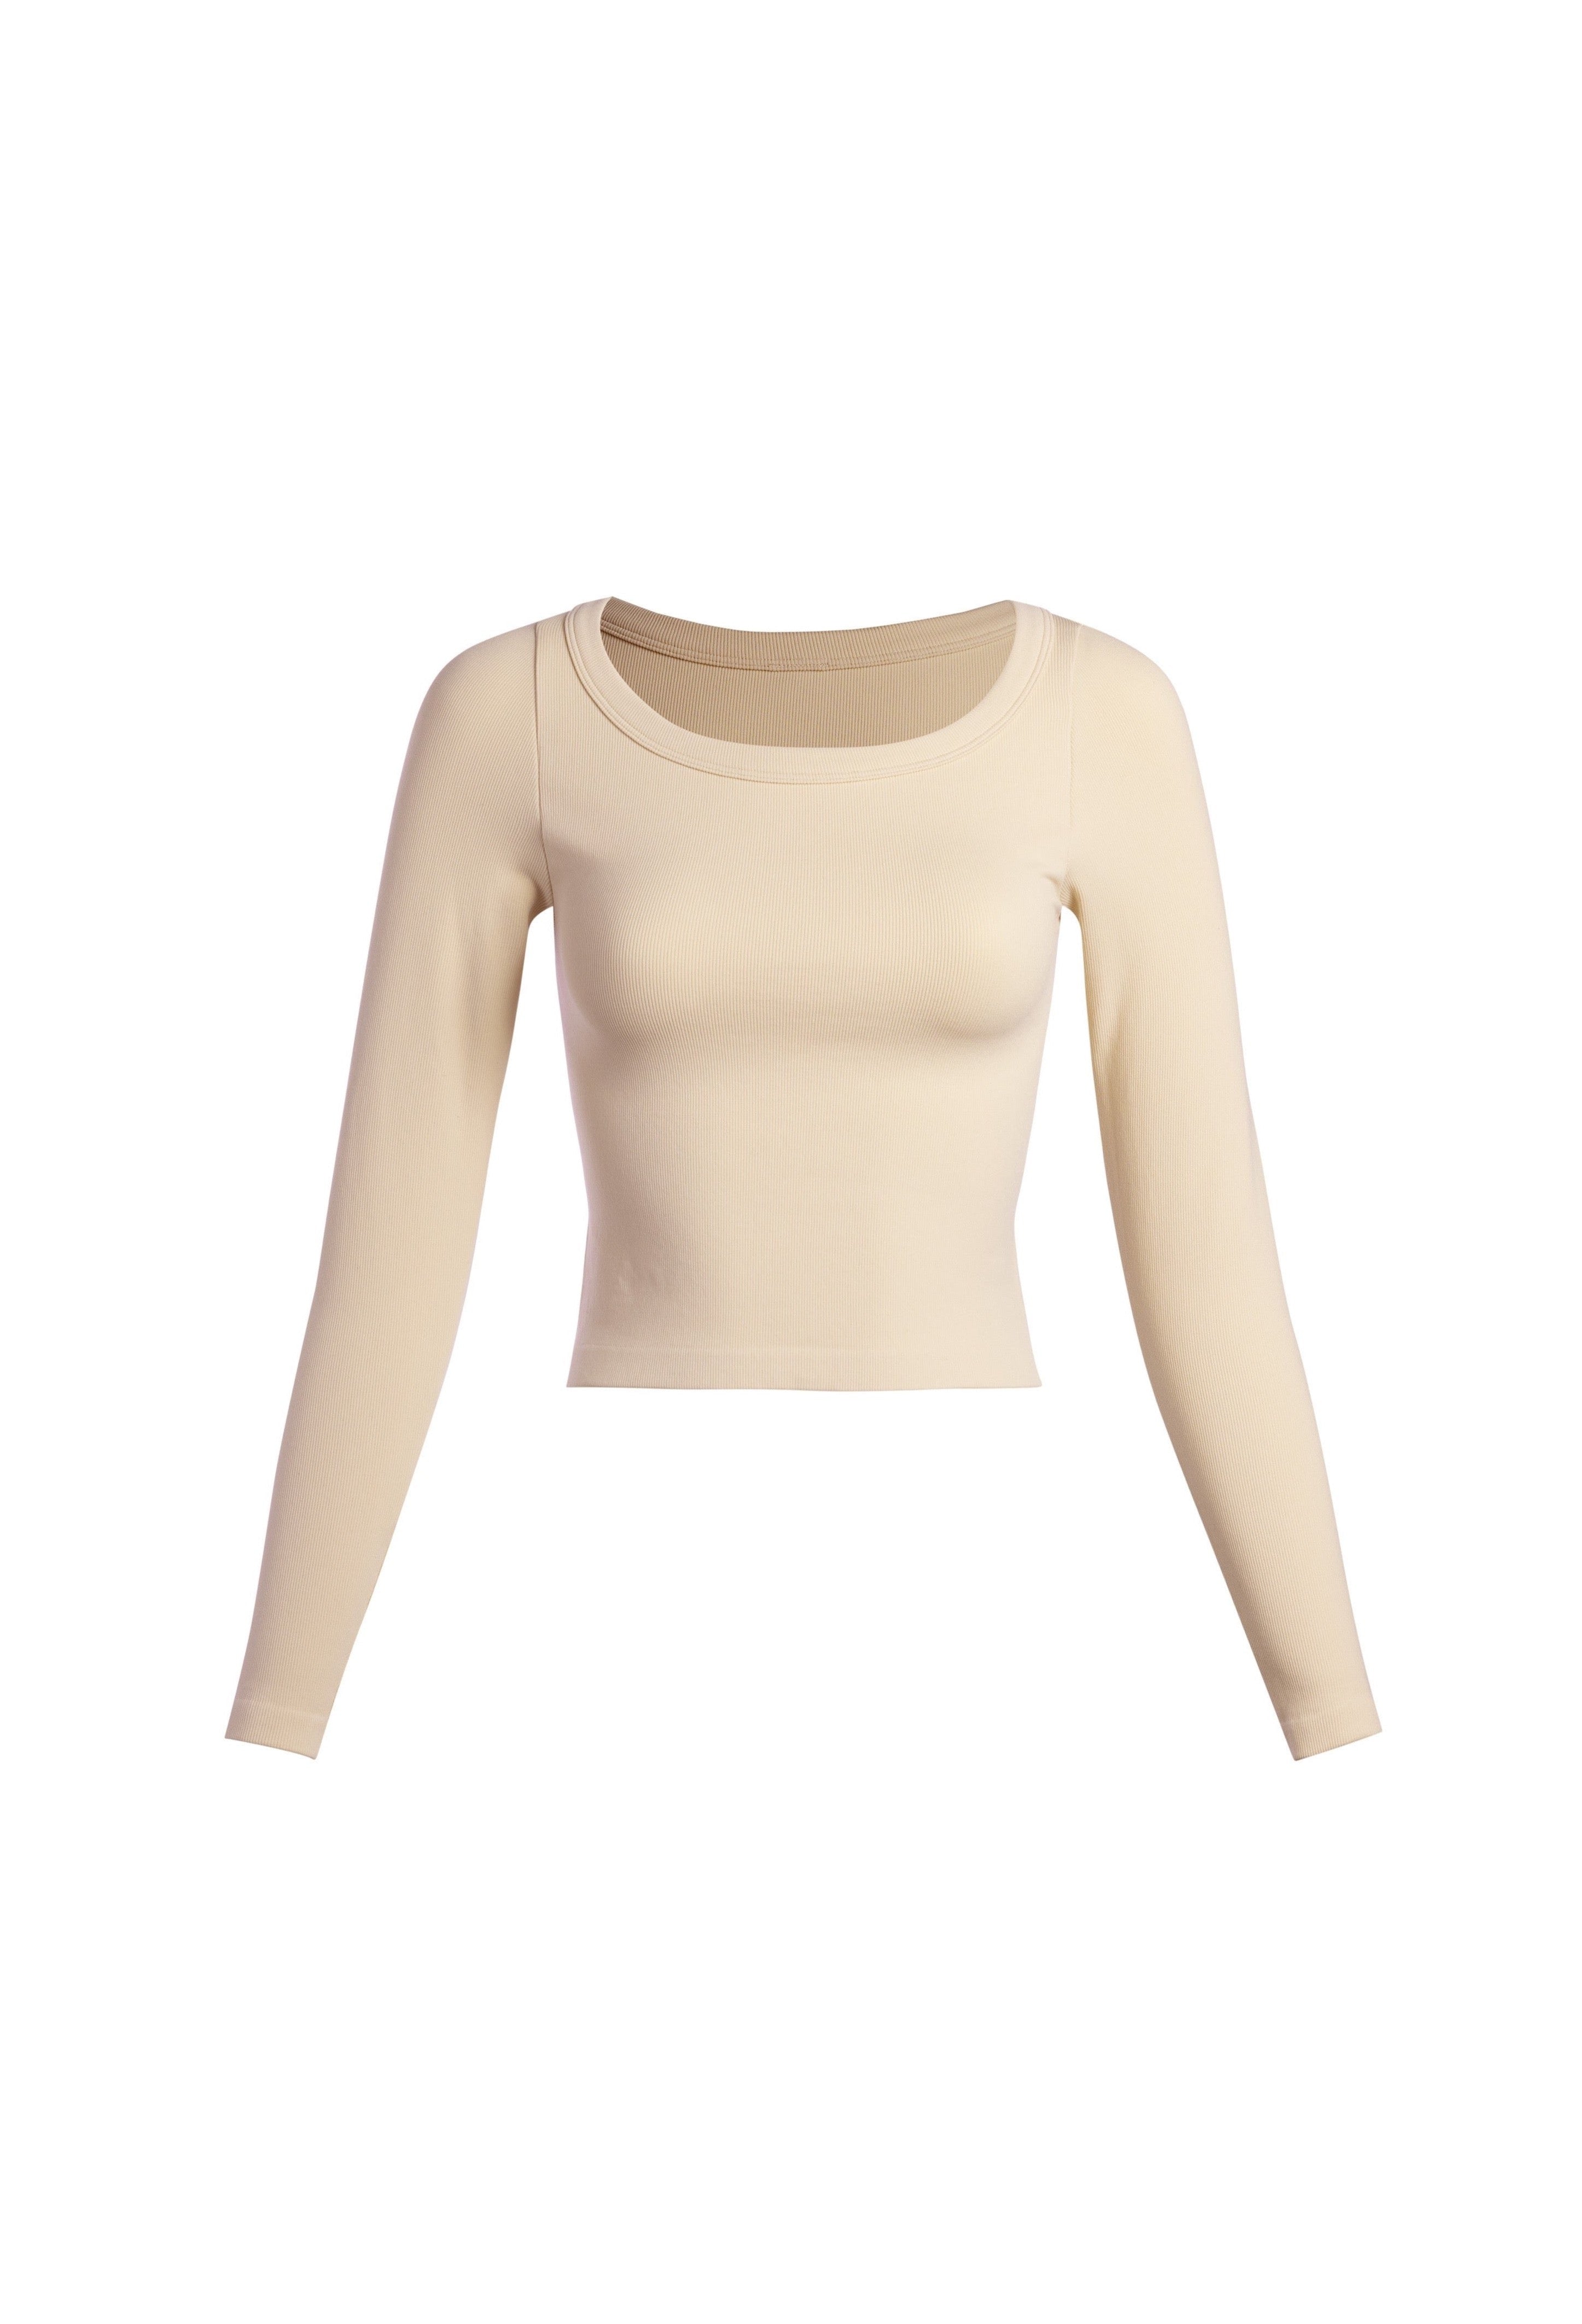 Nude Ribbed Wideneck Longsleeve | Collective Request 